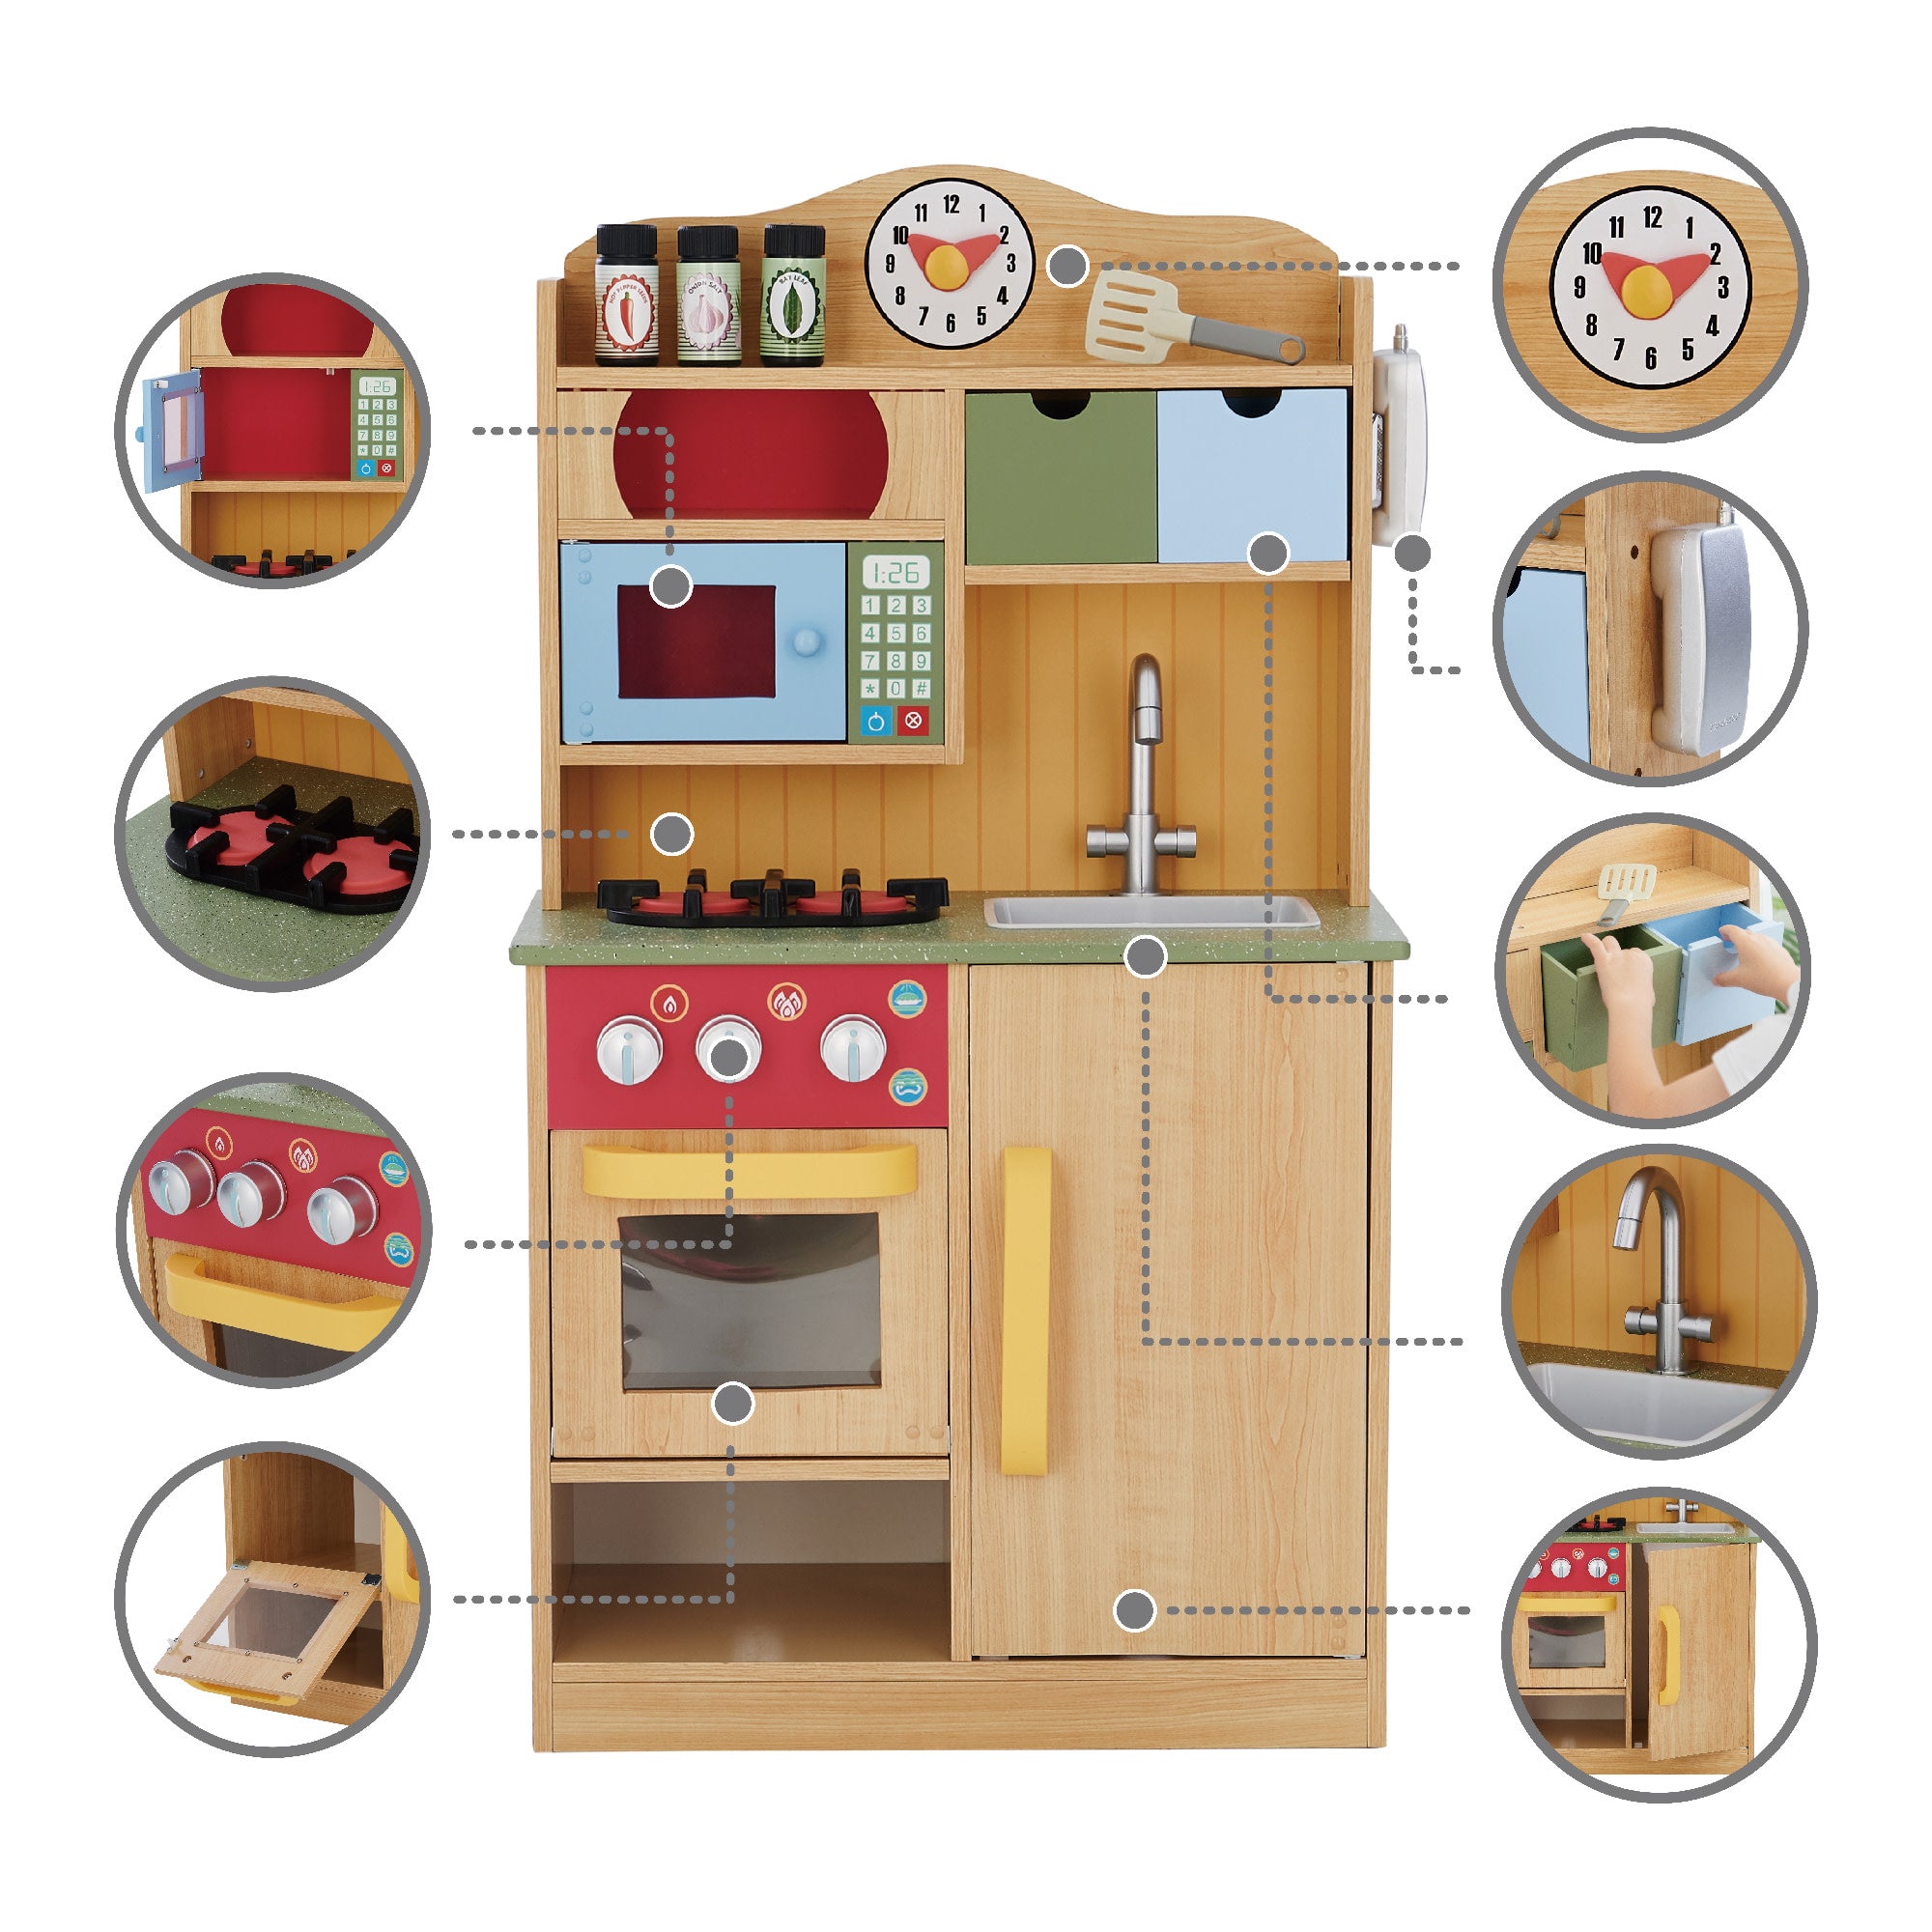 Teamson Kids Little Chef Florence Classic Play Kitchen with 5 Kitchen Accessory Toys, Wood Grain